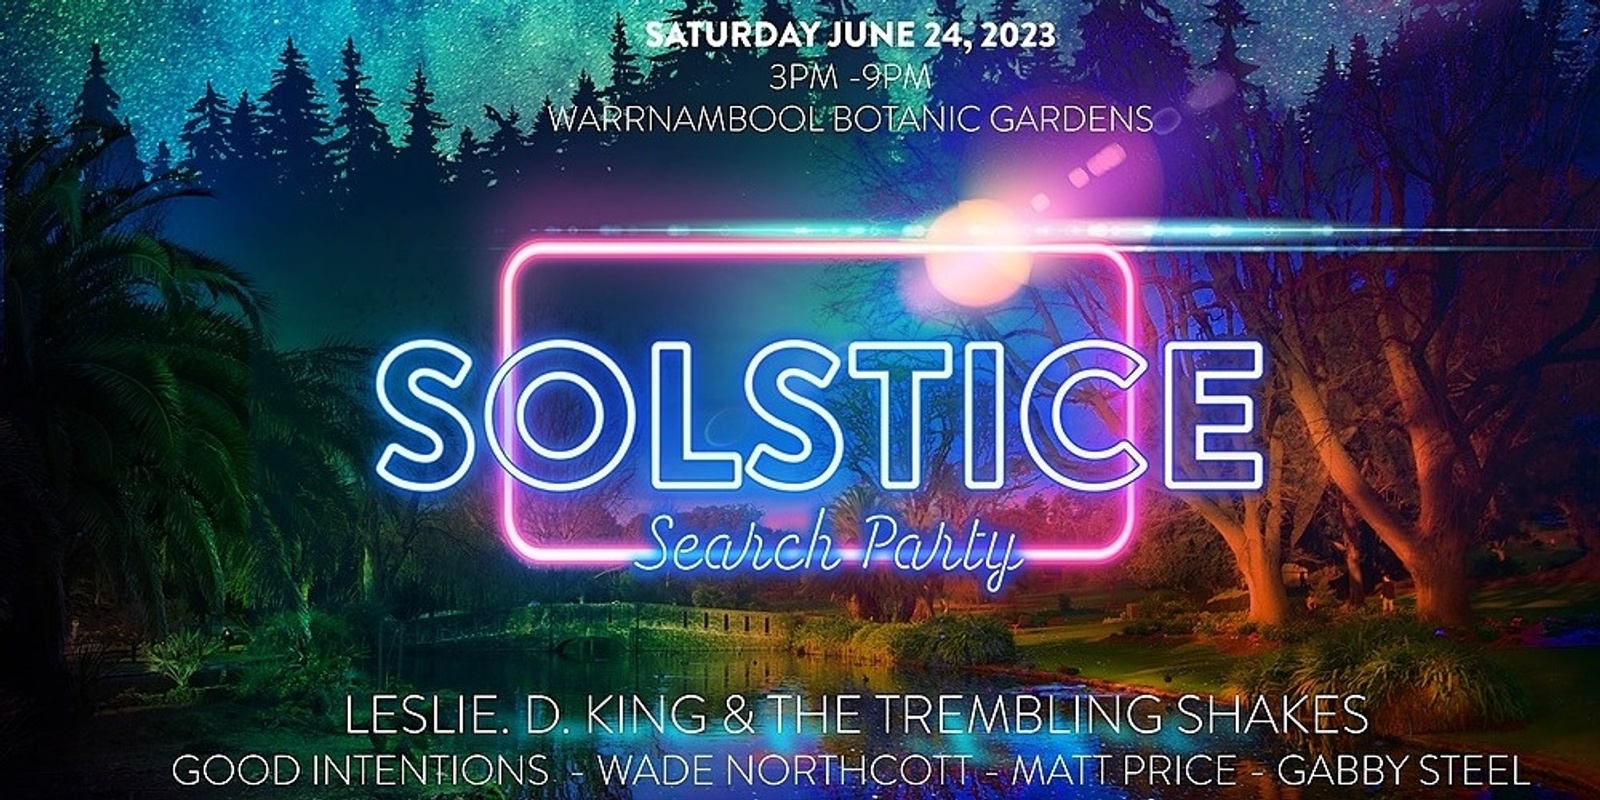 Solstice Search Party 